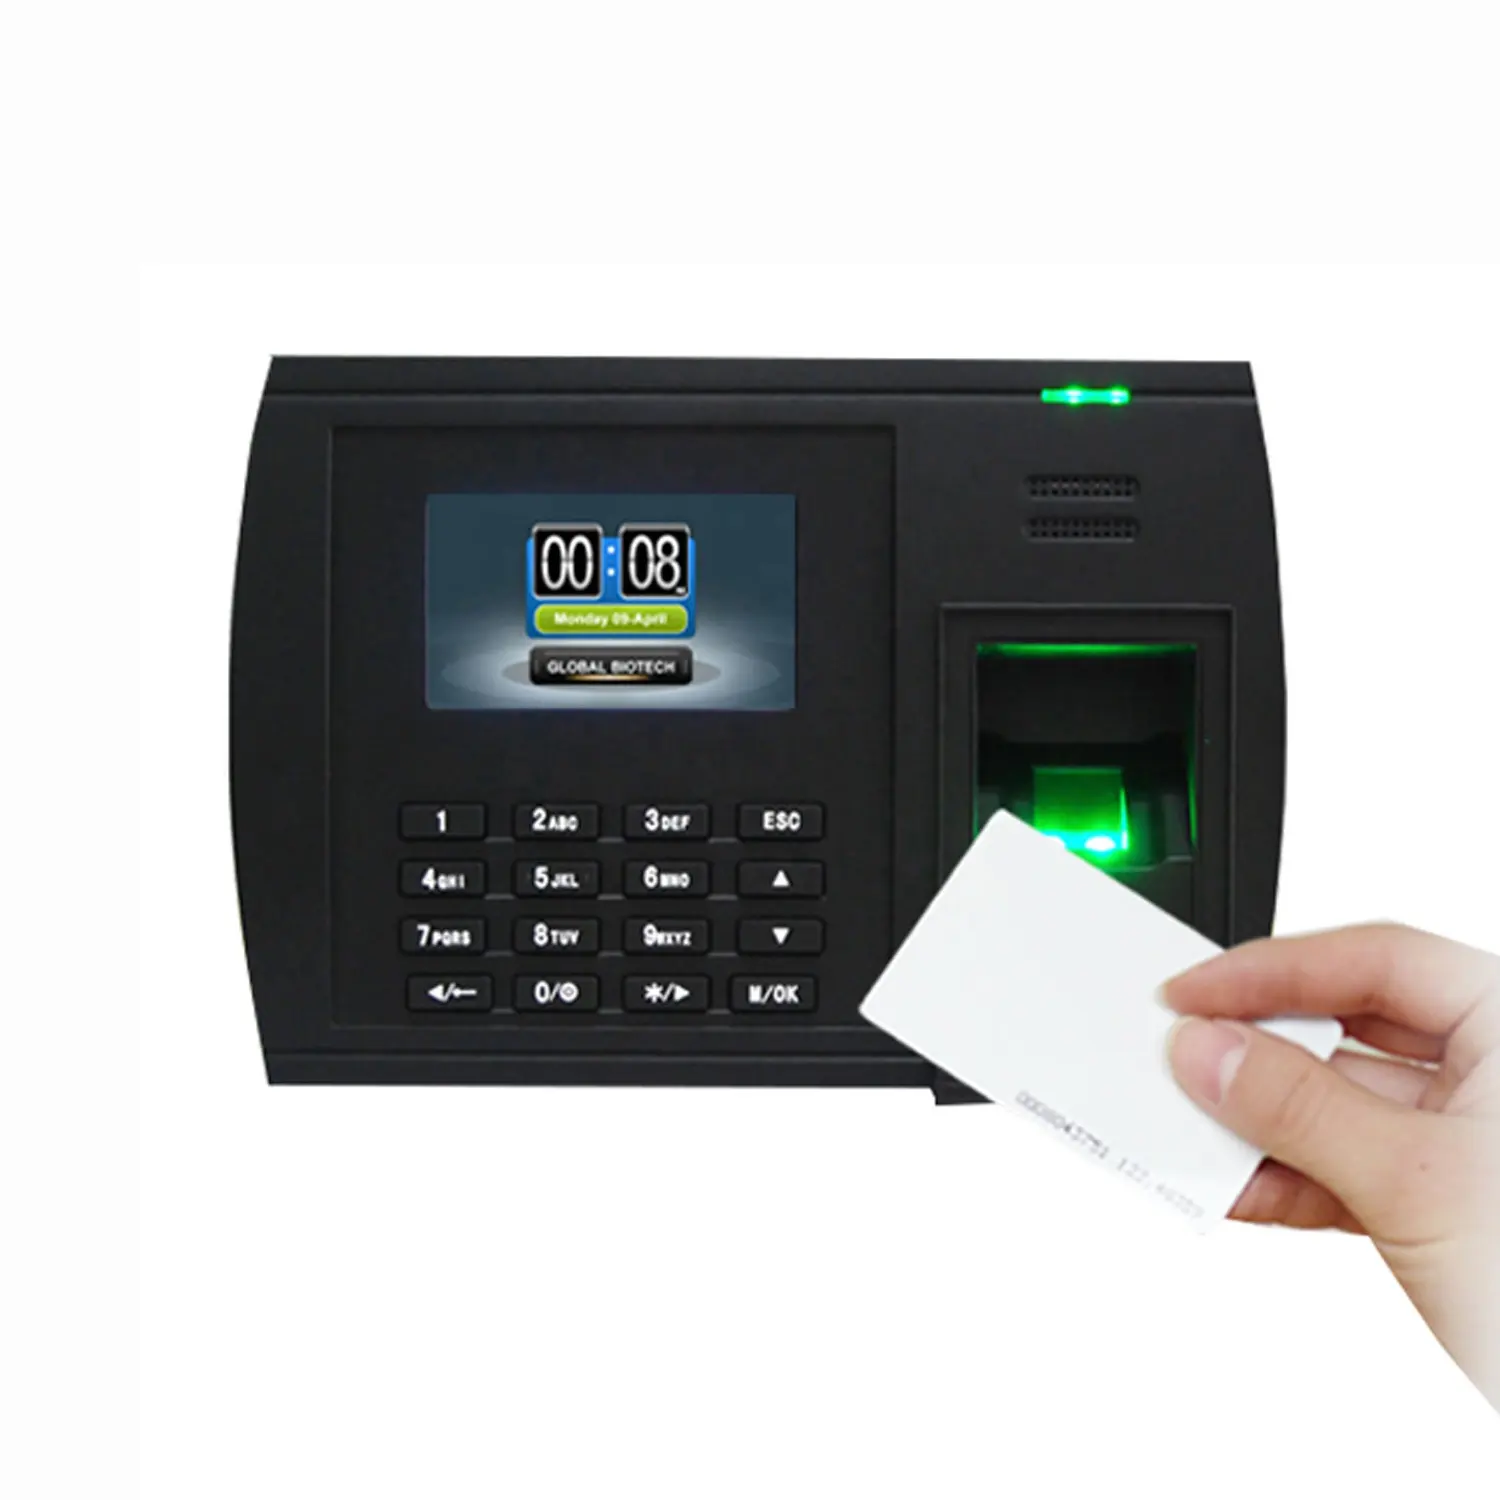 Portable Biometric Time Recording Fingerprint Time Attendance with LCD Display HGT-5000